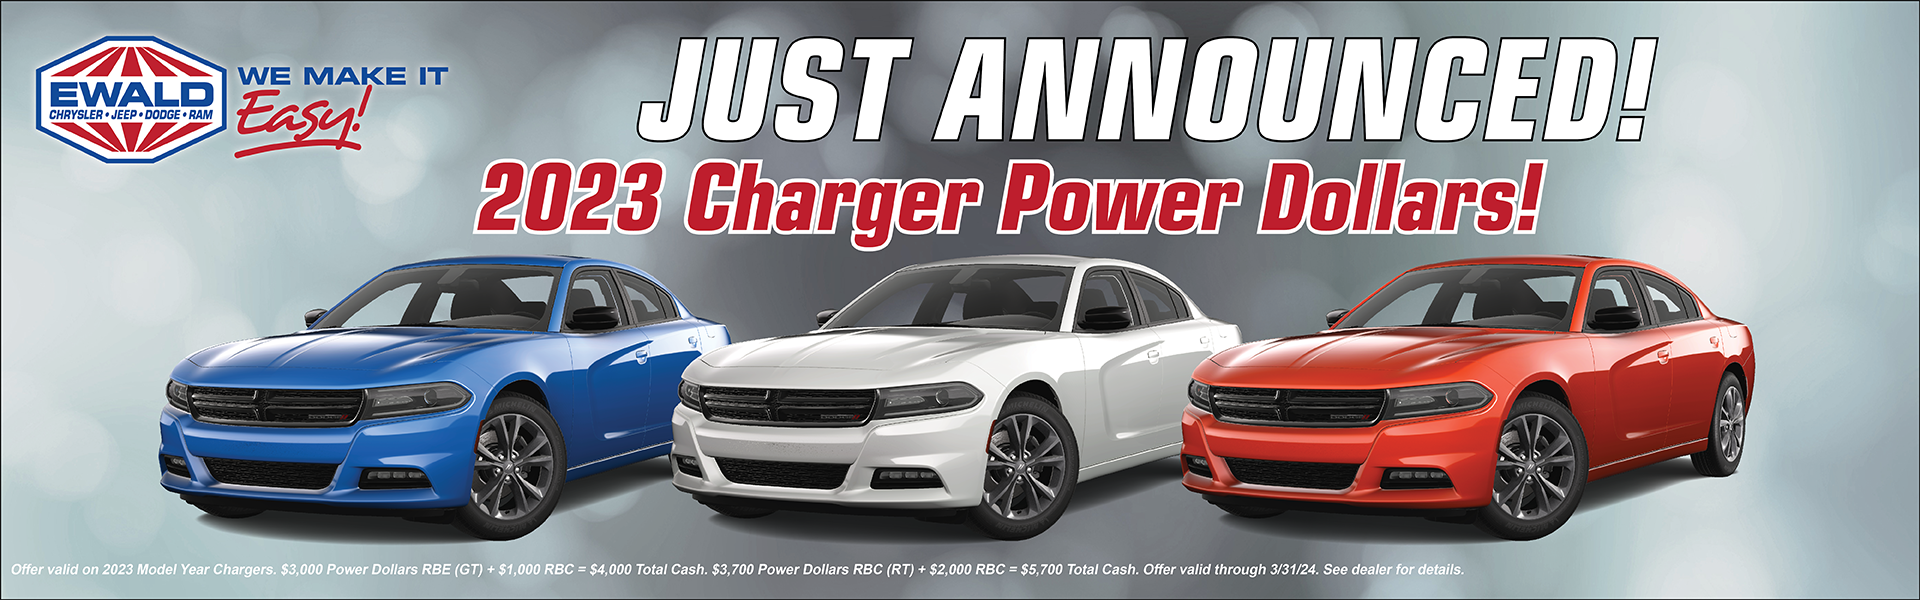 Dodge Charger Power Dollars